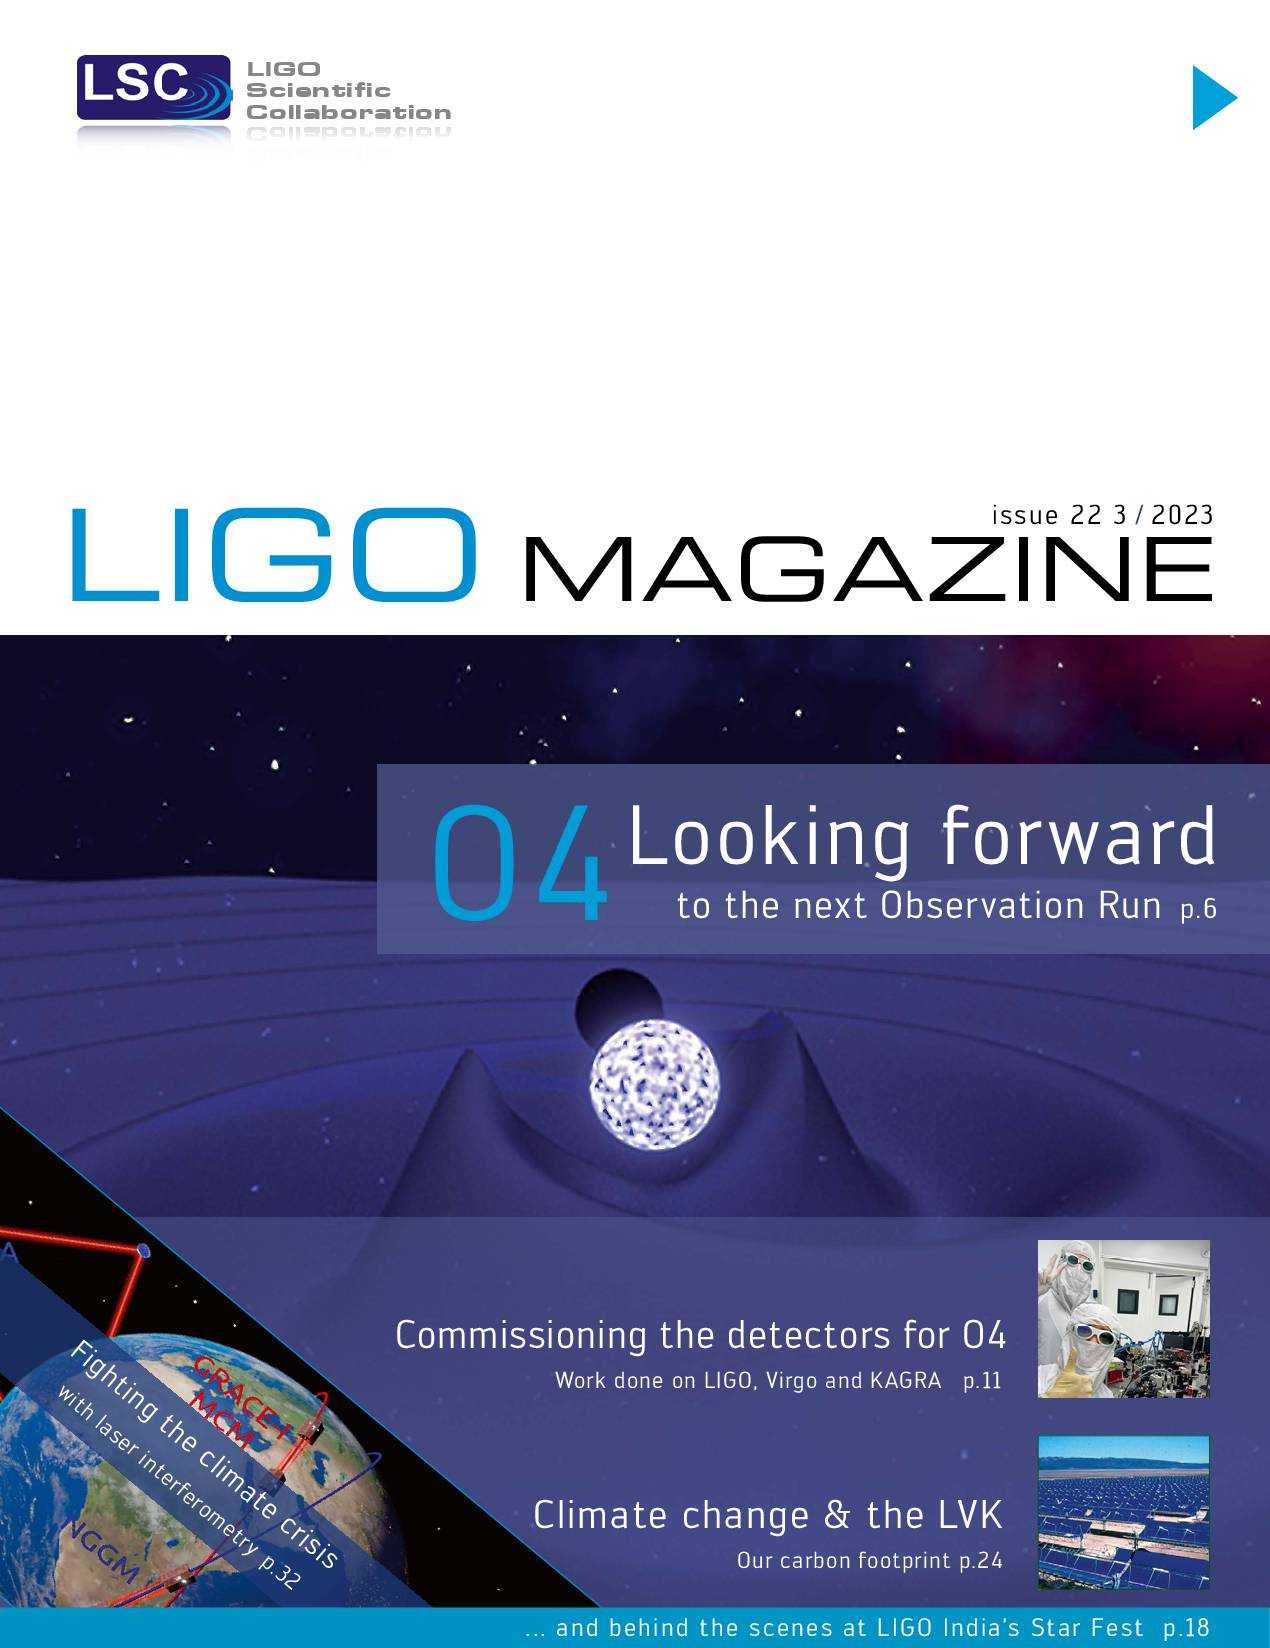 News-Image 28 of: New LIGO Magazine Issue 22 is out